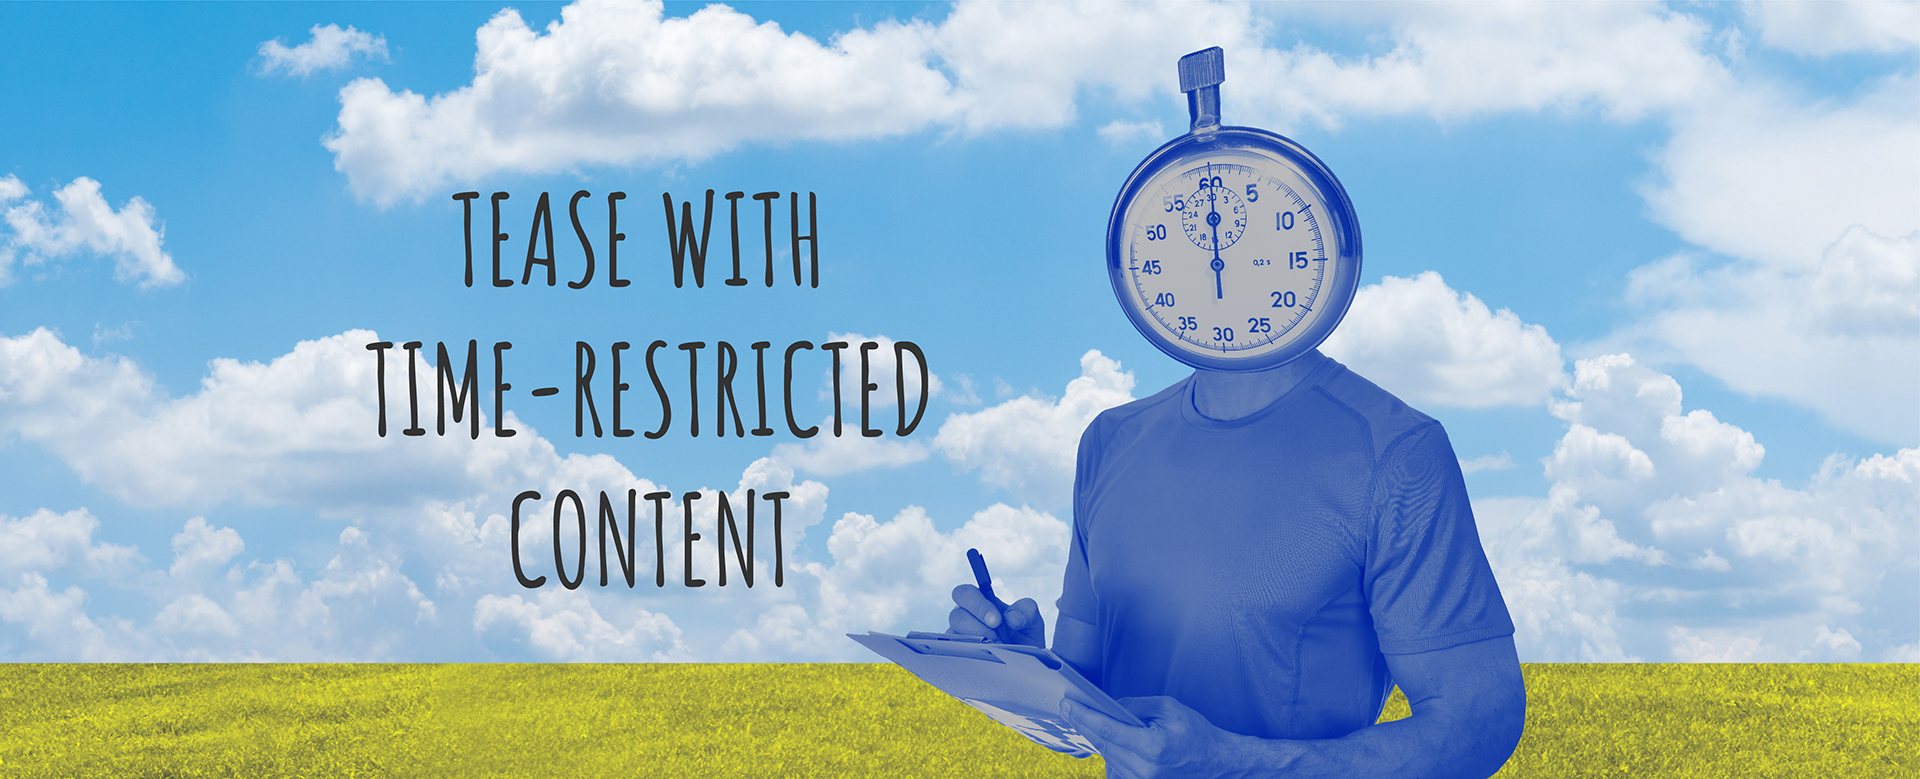 Tease With Time-Restricted Content